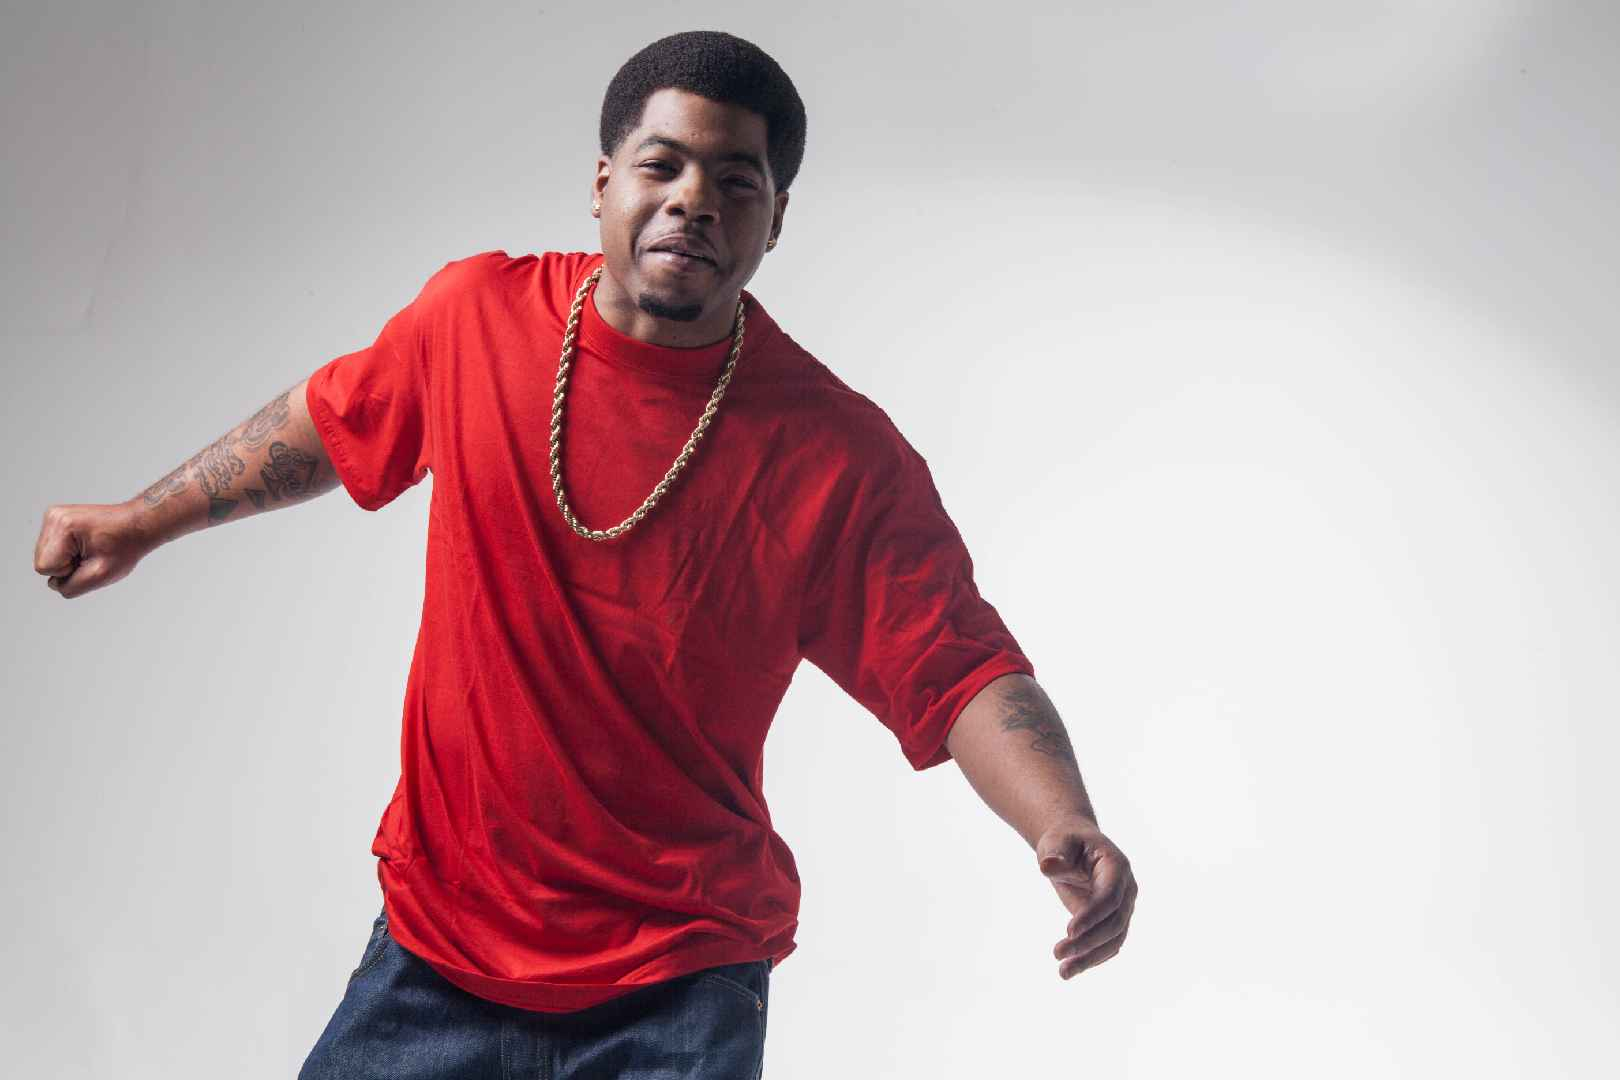 Exclusive: Lil Webbie opens up about all the drama